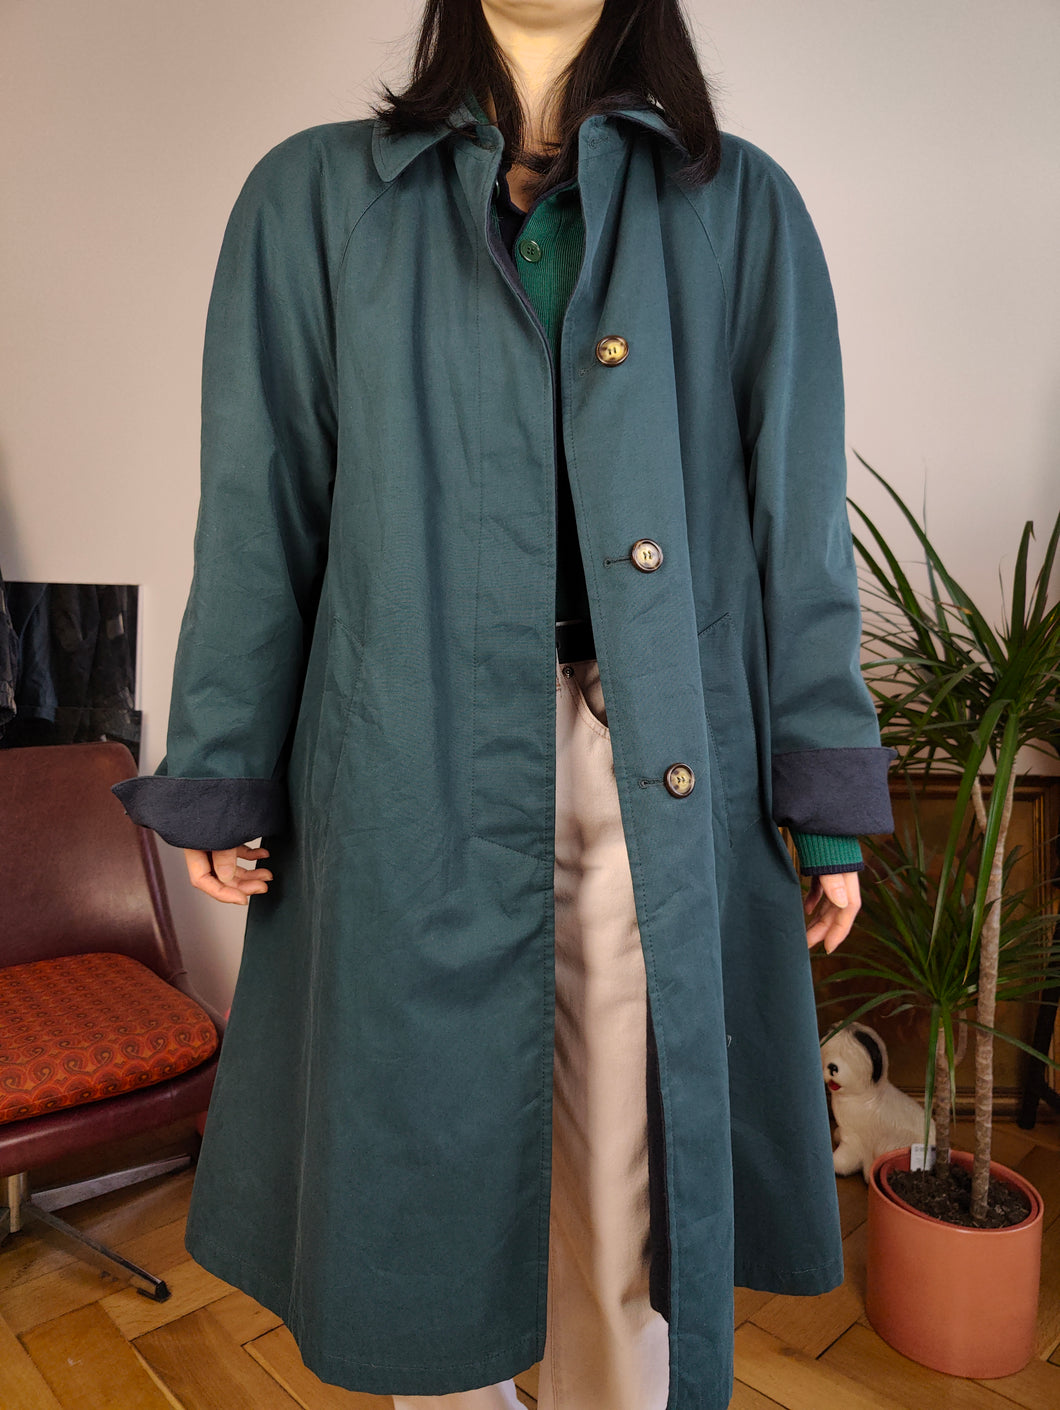 Vintage 2-in-1 reversible trench coat wool navy blue teal green long lining women M